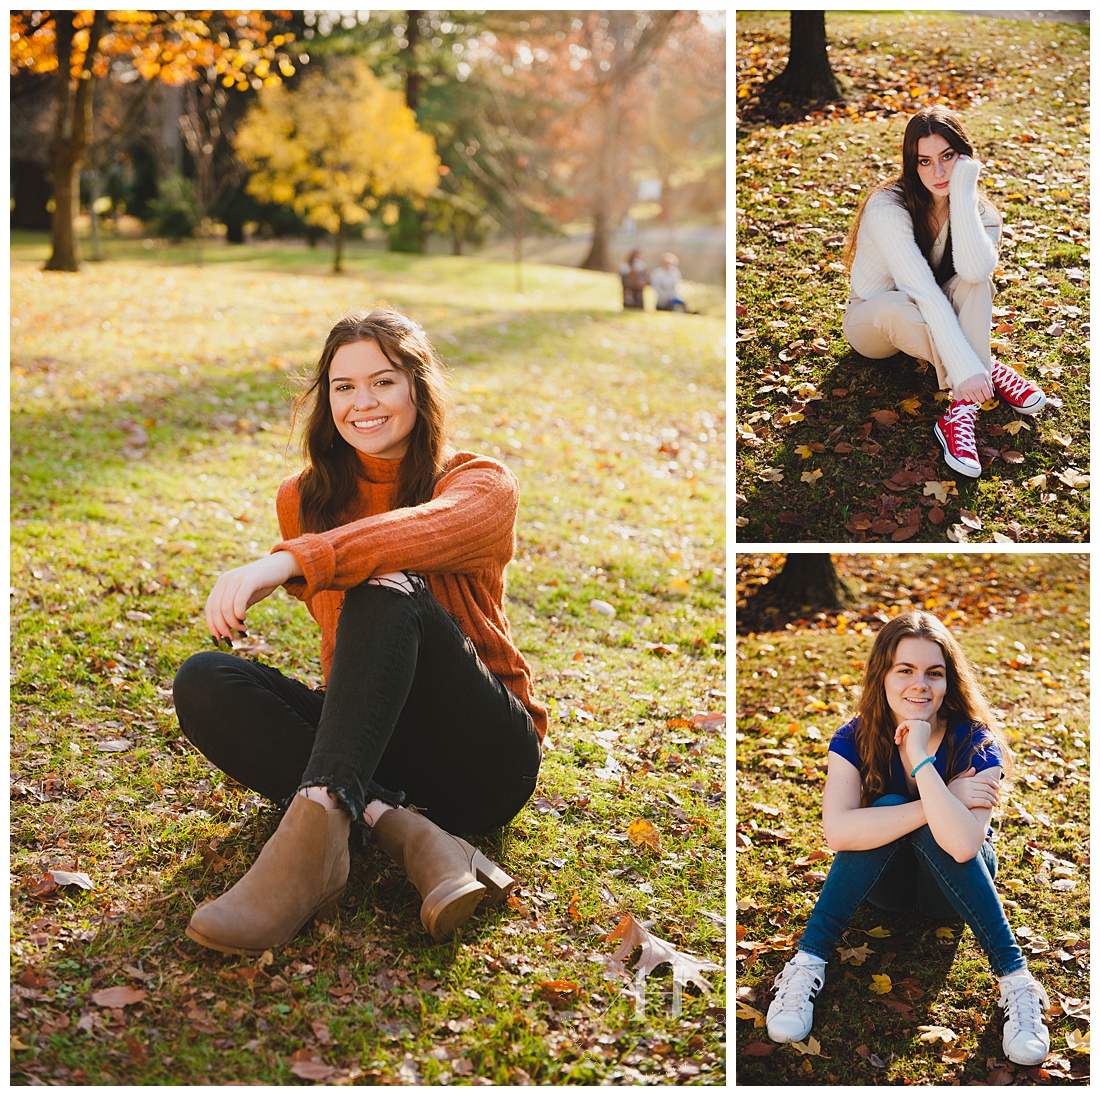 Cute Fall Portraits of Senior Girls | Booties and Sweaters for Senior Portraits, Pose Ideas for Senior Girls, Fall Leaves, Sunlight, Outfit Inspiration | Photographed by the Best Tacoma Senior Photographer Amanda Howse